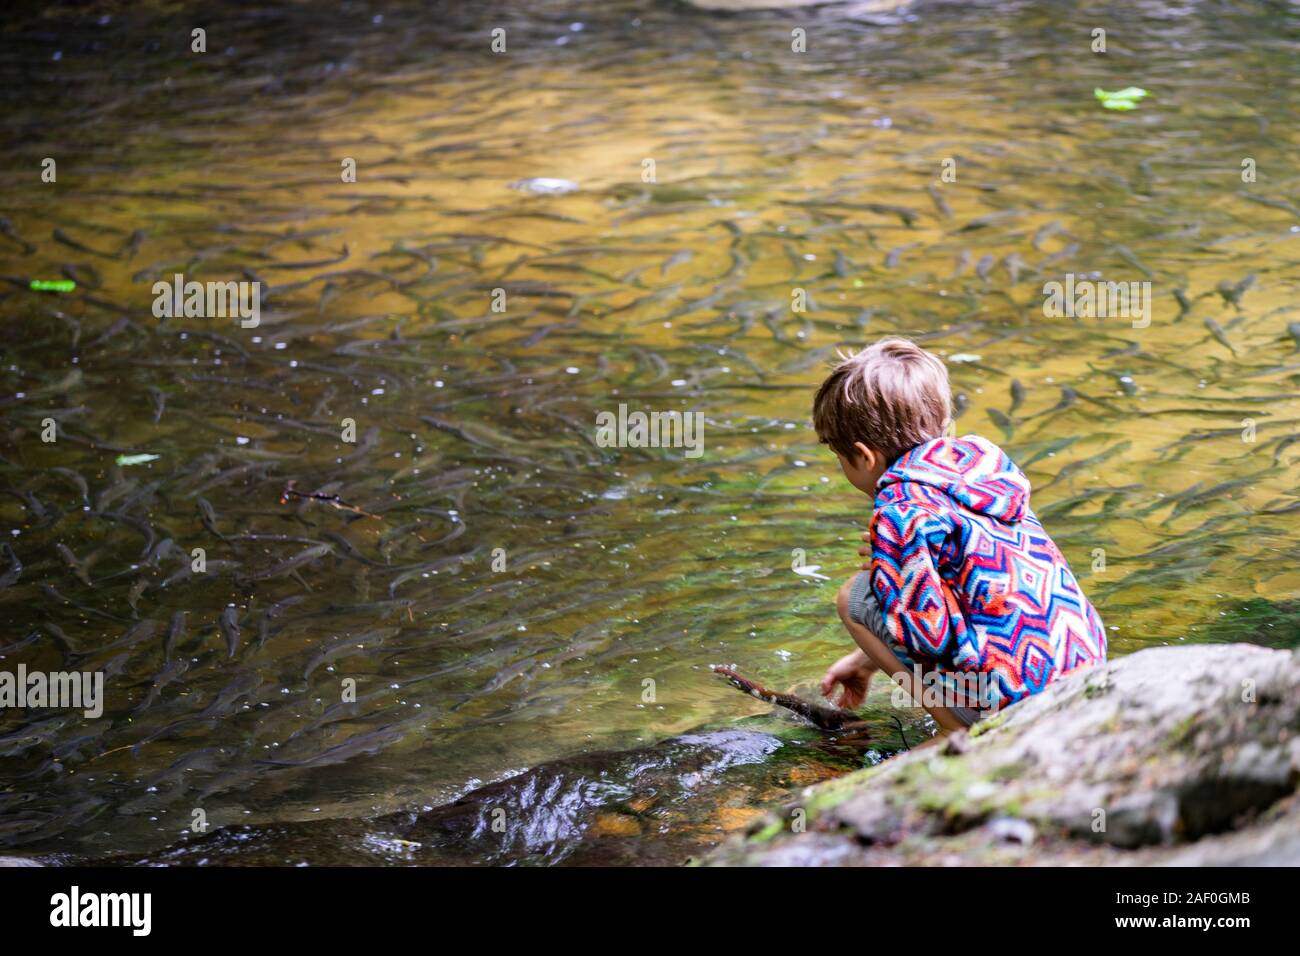 Young boy playing near water with fish Stock Photo